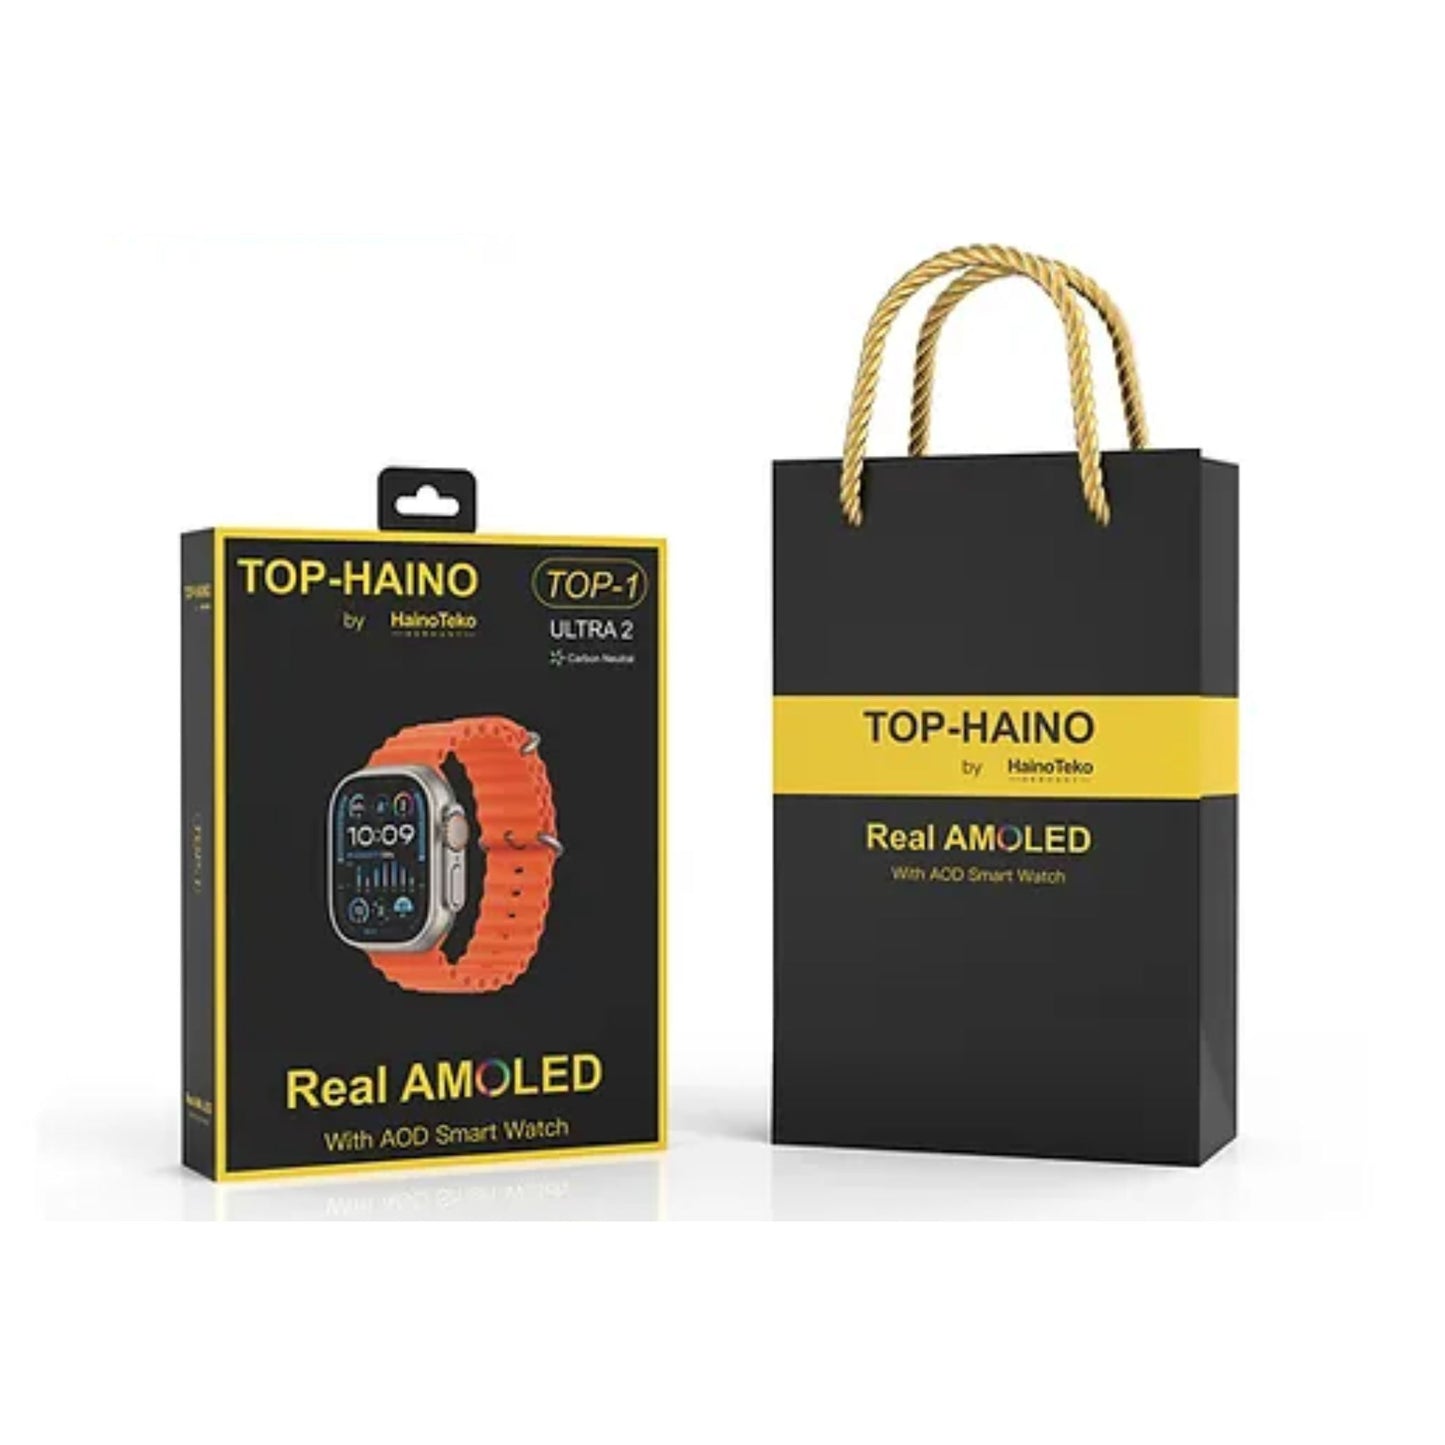 Premium Haino Teko Germany TOP 1 Full Screen Real AMOLED Display_ 3 Pair Straps_Wireless Charger_For Ladies and Gents_Orange